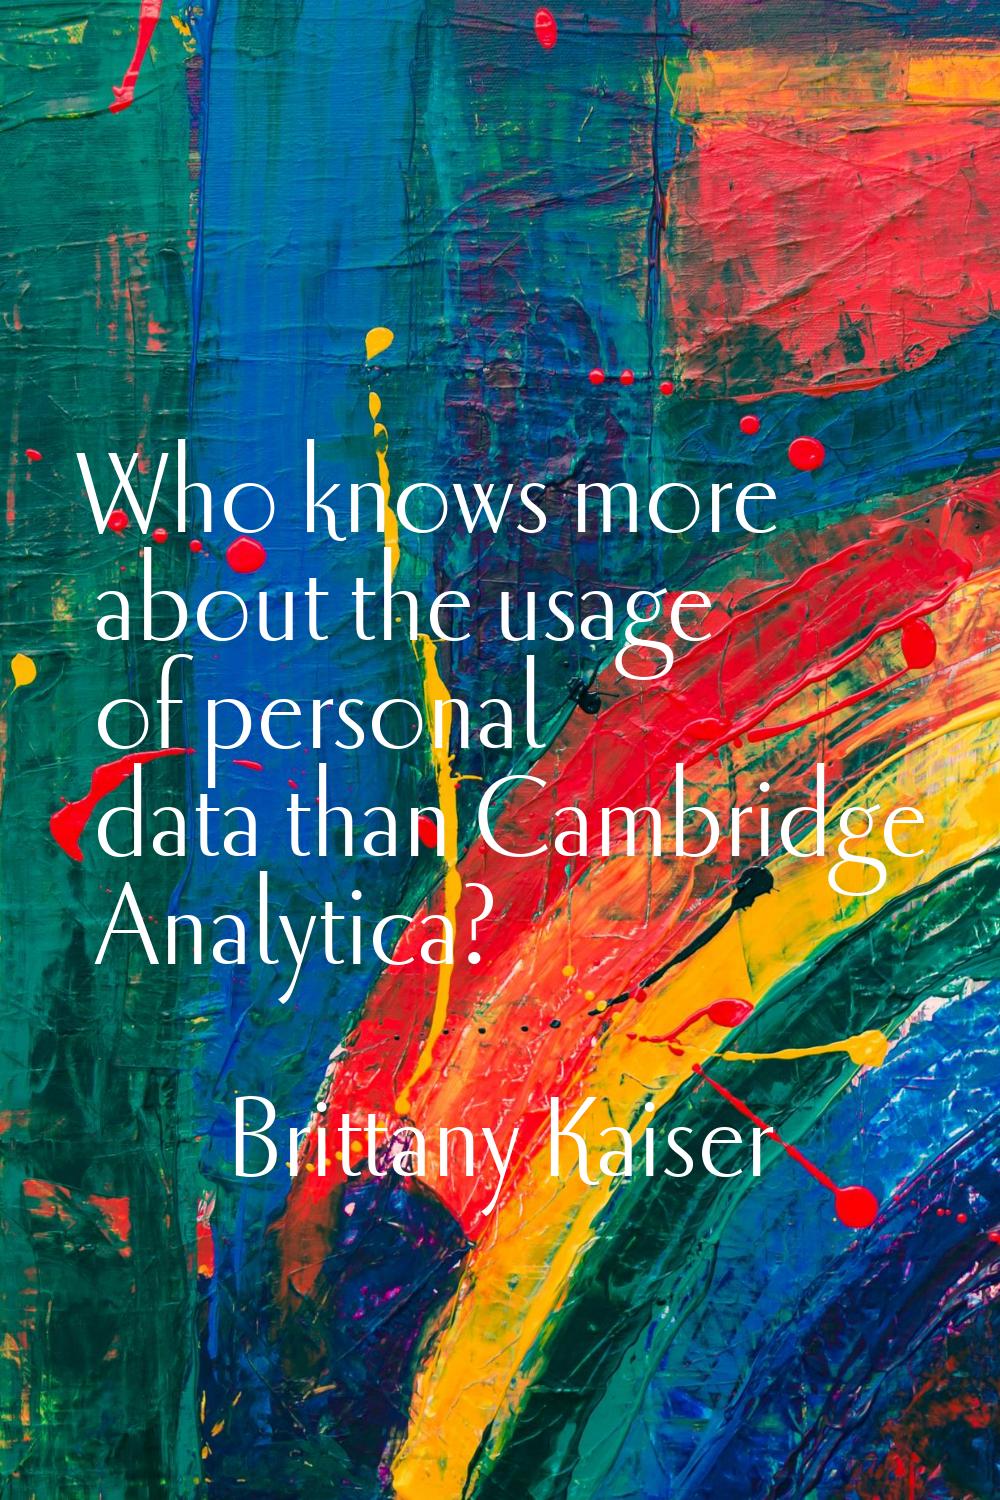 Who knows more about the usage of personal data than Cambridge Analytica?